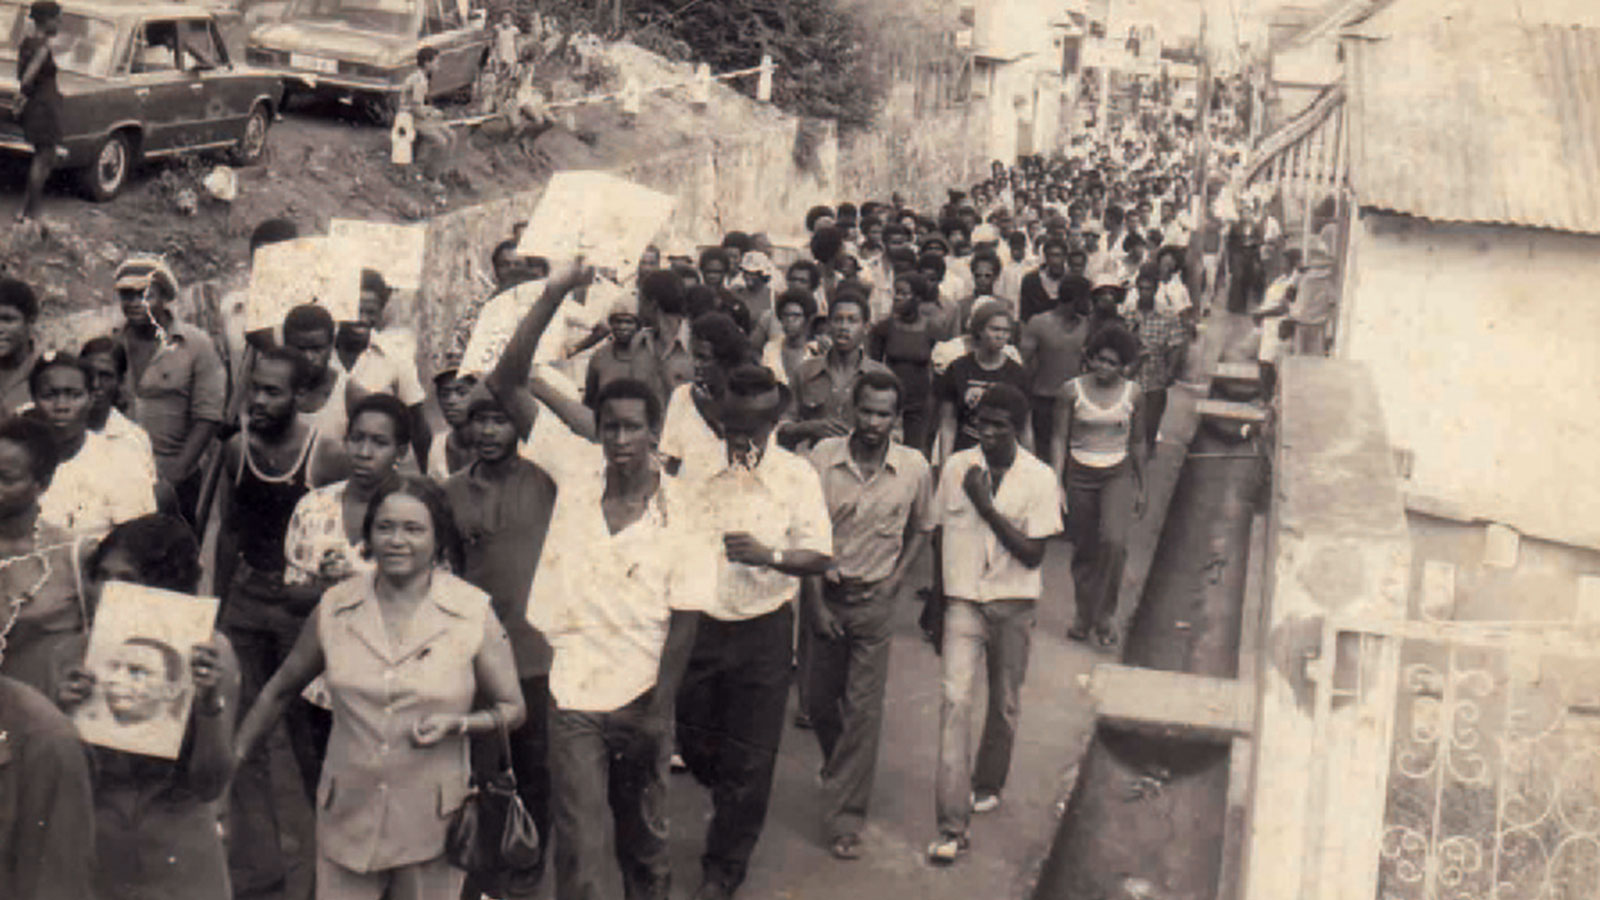 Demonstrators carry photos of Rupert Bishop who was killed on 21 January 1974